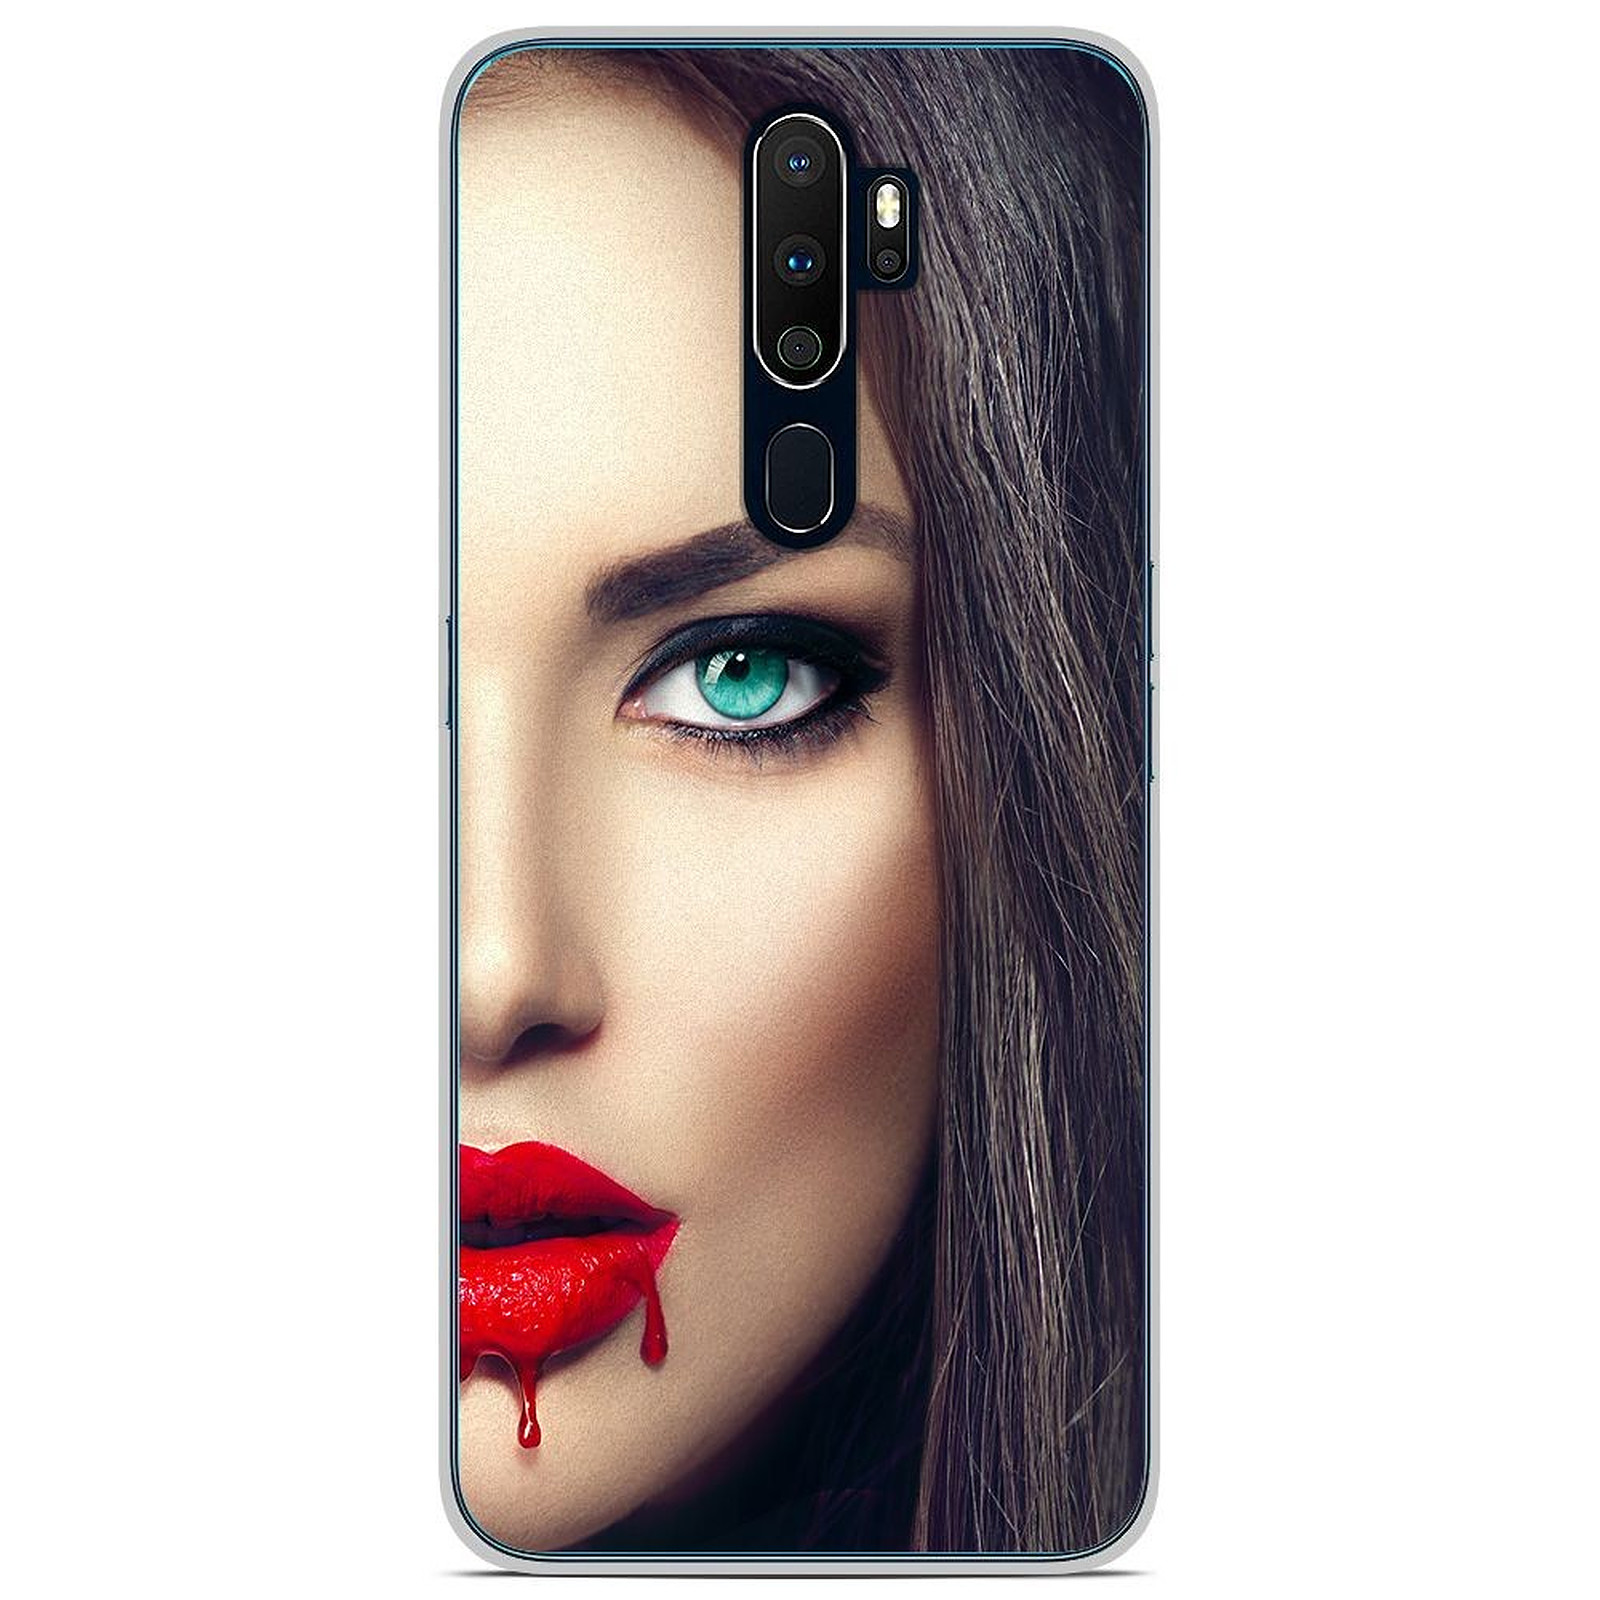 1001 Coques Coque silicone gel Oppo A5 2020 motif Lèvres Sang - Coque telephone 1001Coques